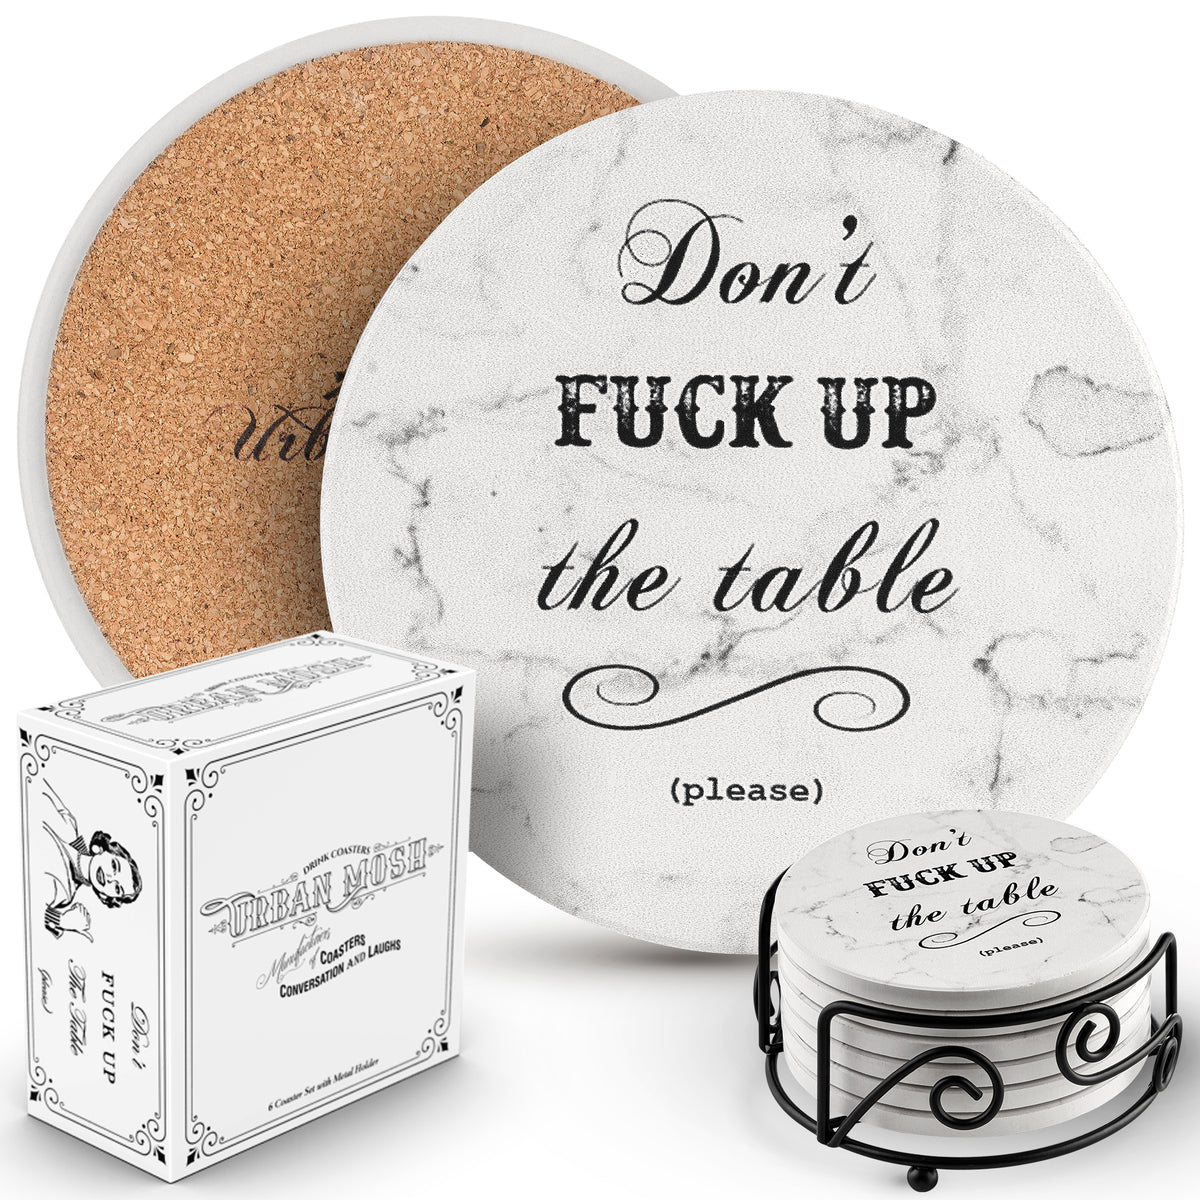 Set of 6 Wooden White Coasters with Holder for Drinks, Coffee